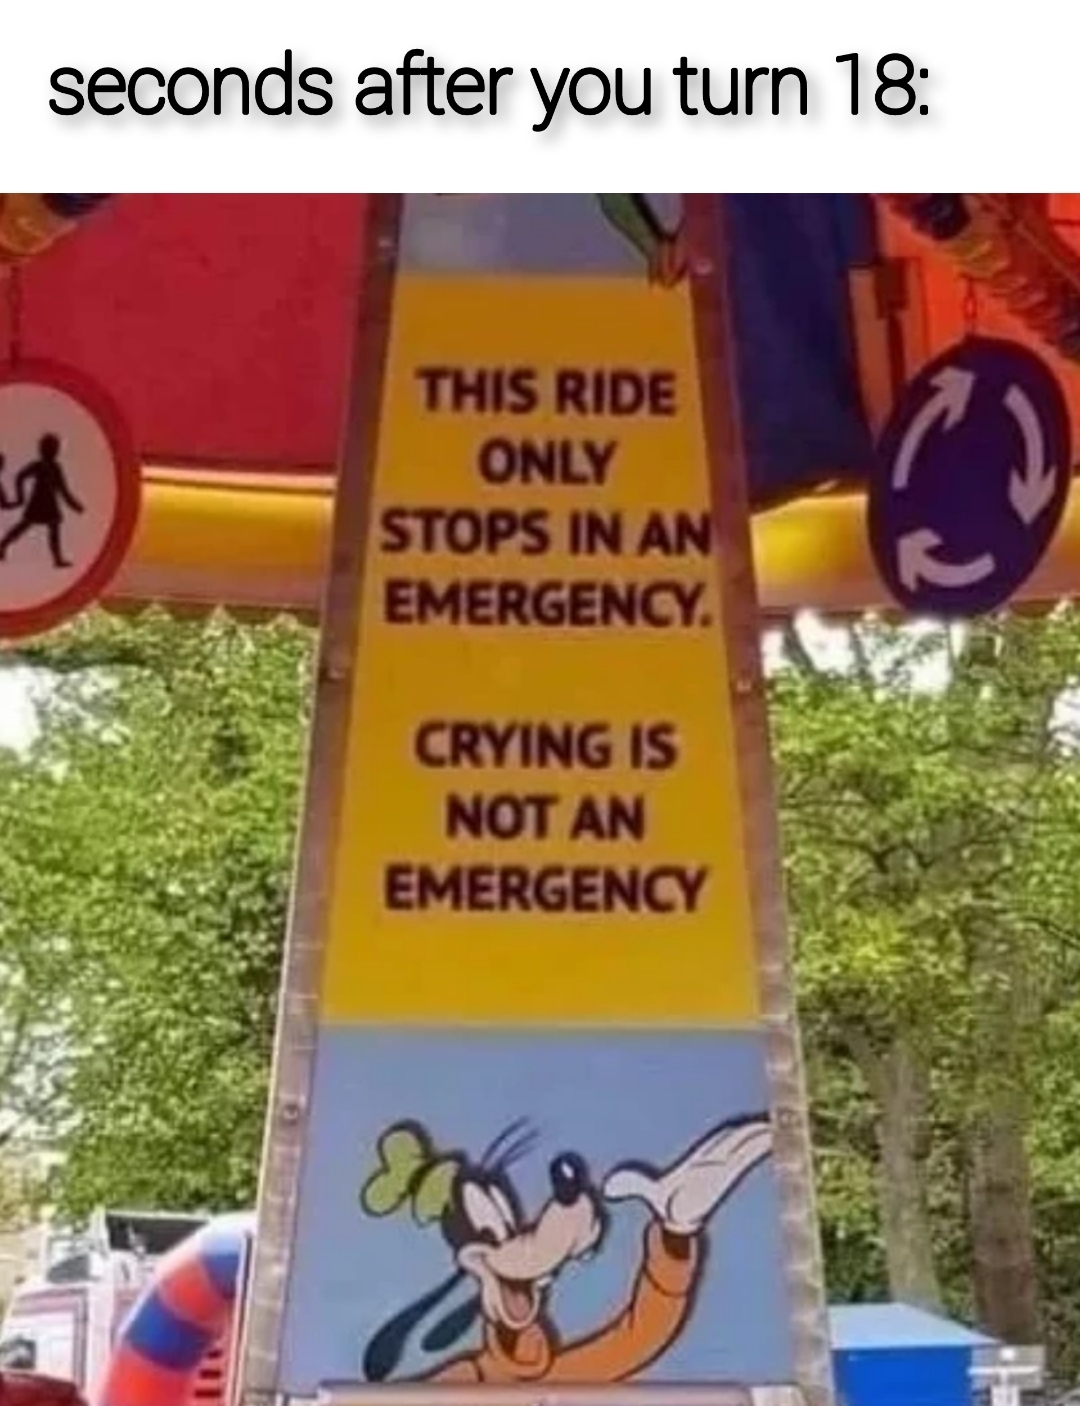 crying is not an emergency - seconds after you turn 18 This Ride Only Stops In An Emergency 2 Crying Is Not An Emergency